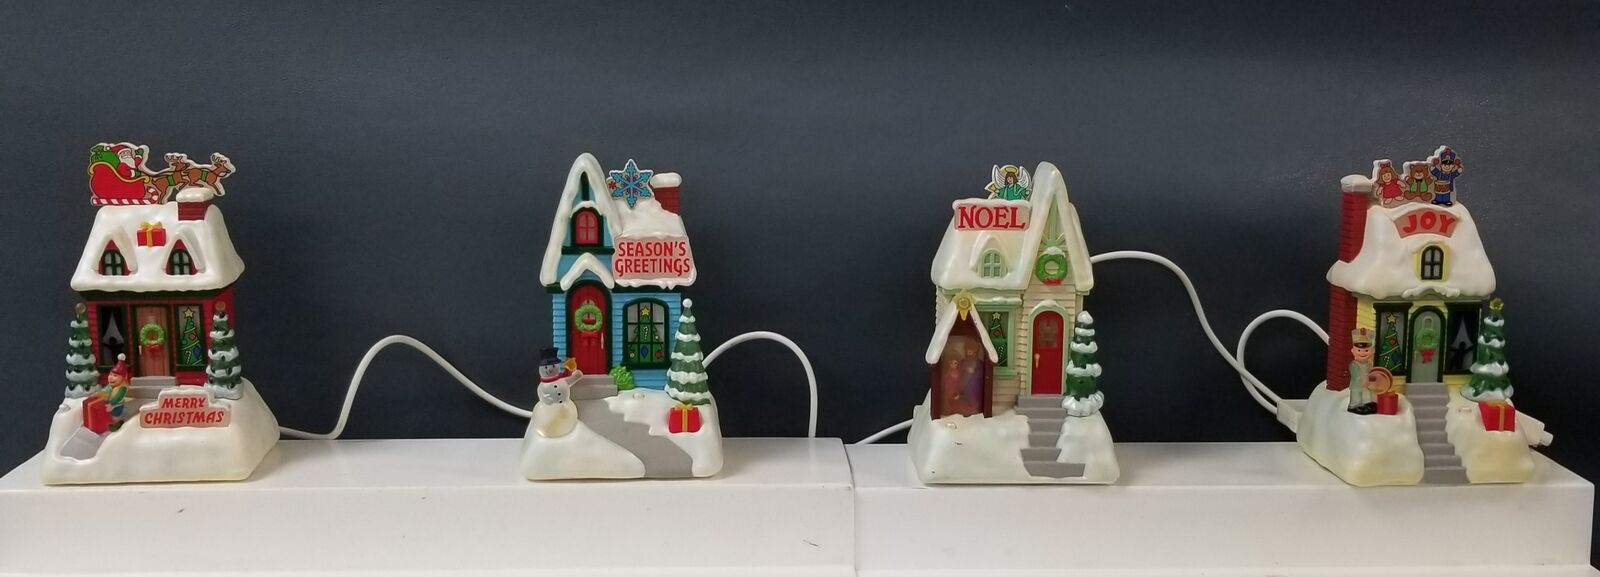 LOT of 4 2009 Hallmark Christmas Caroling Cottages Lights Interacts Music TESTED